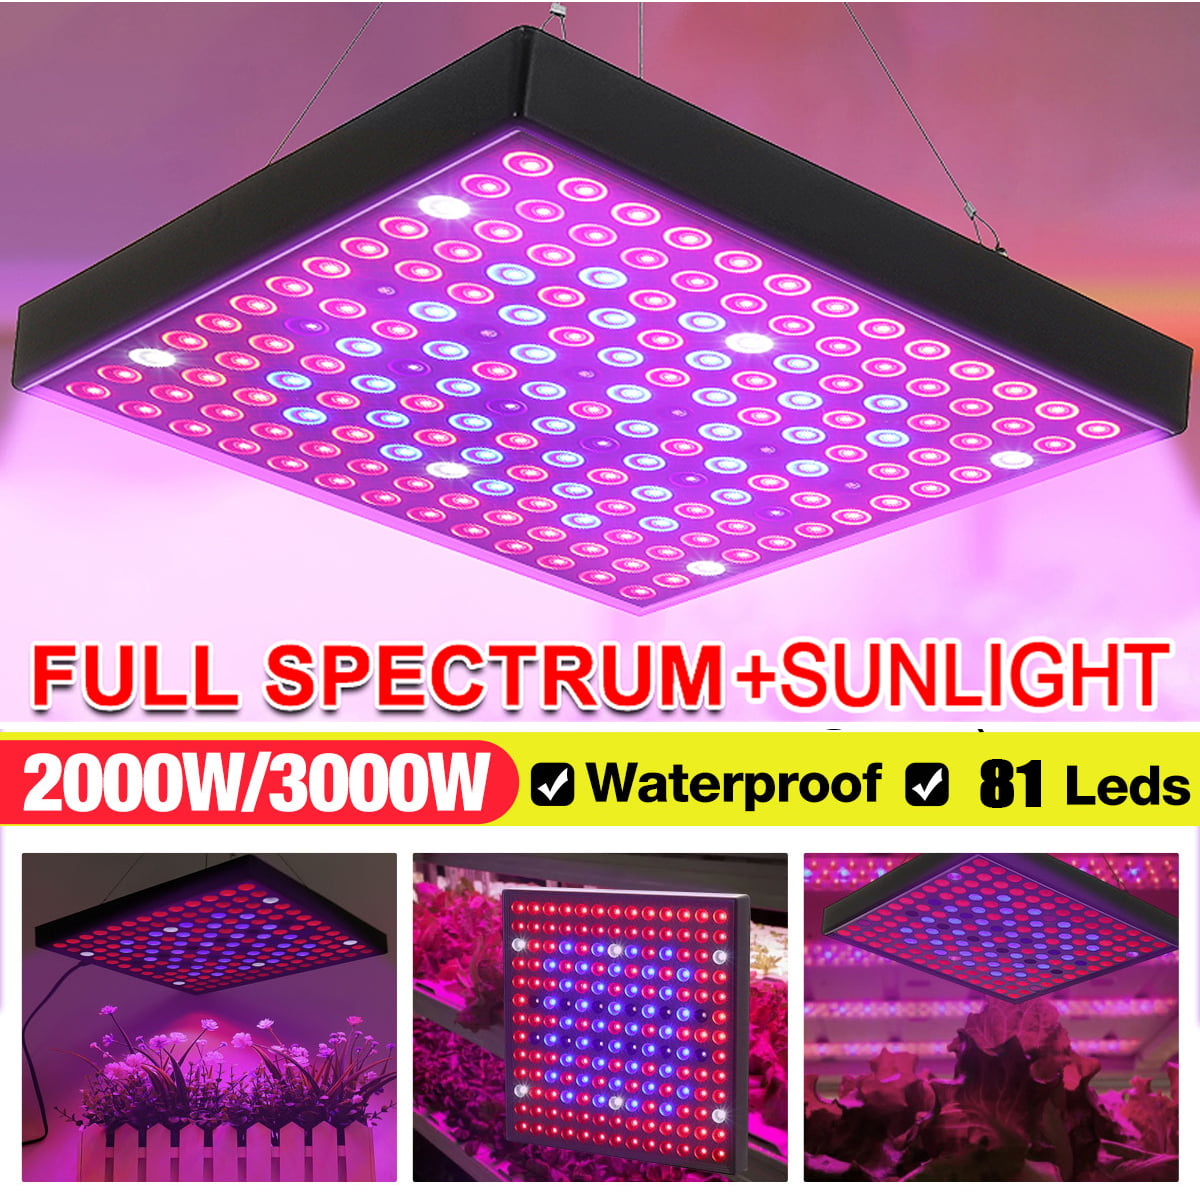 2000W Full Spectrum LED Growing Lamp For Hydroponic Indoor Plants Veg Flowers 